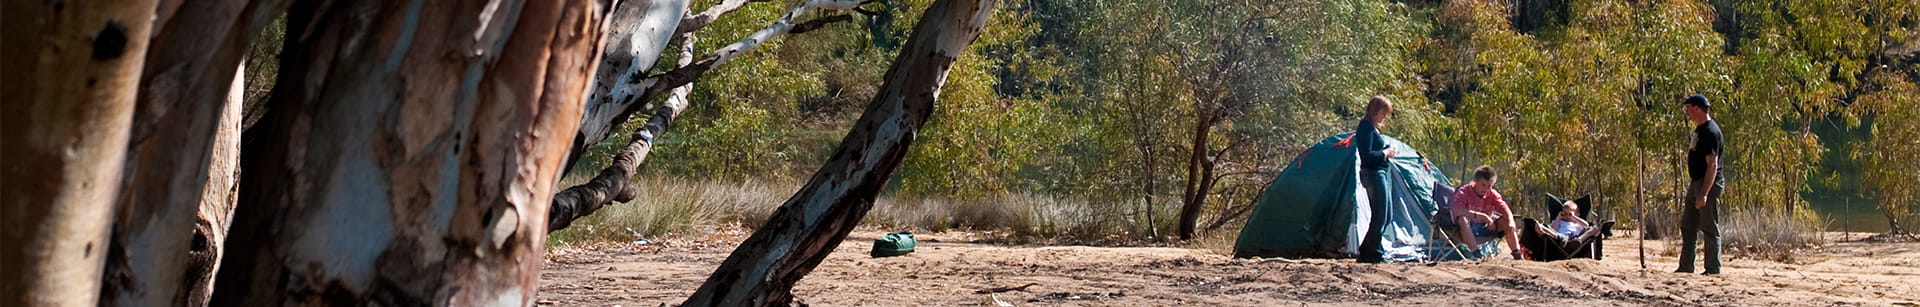 A tree in the foreground, with a family camping with their tent and equipment in the background.